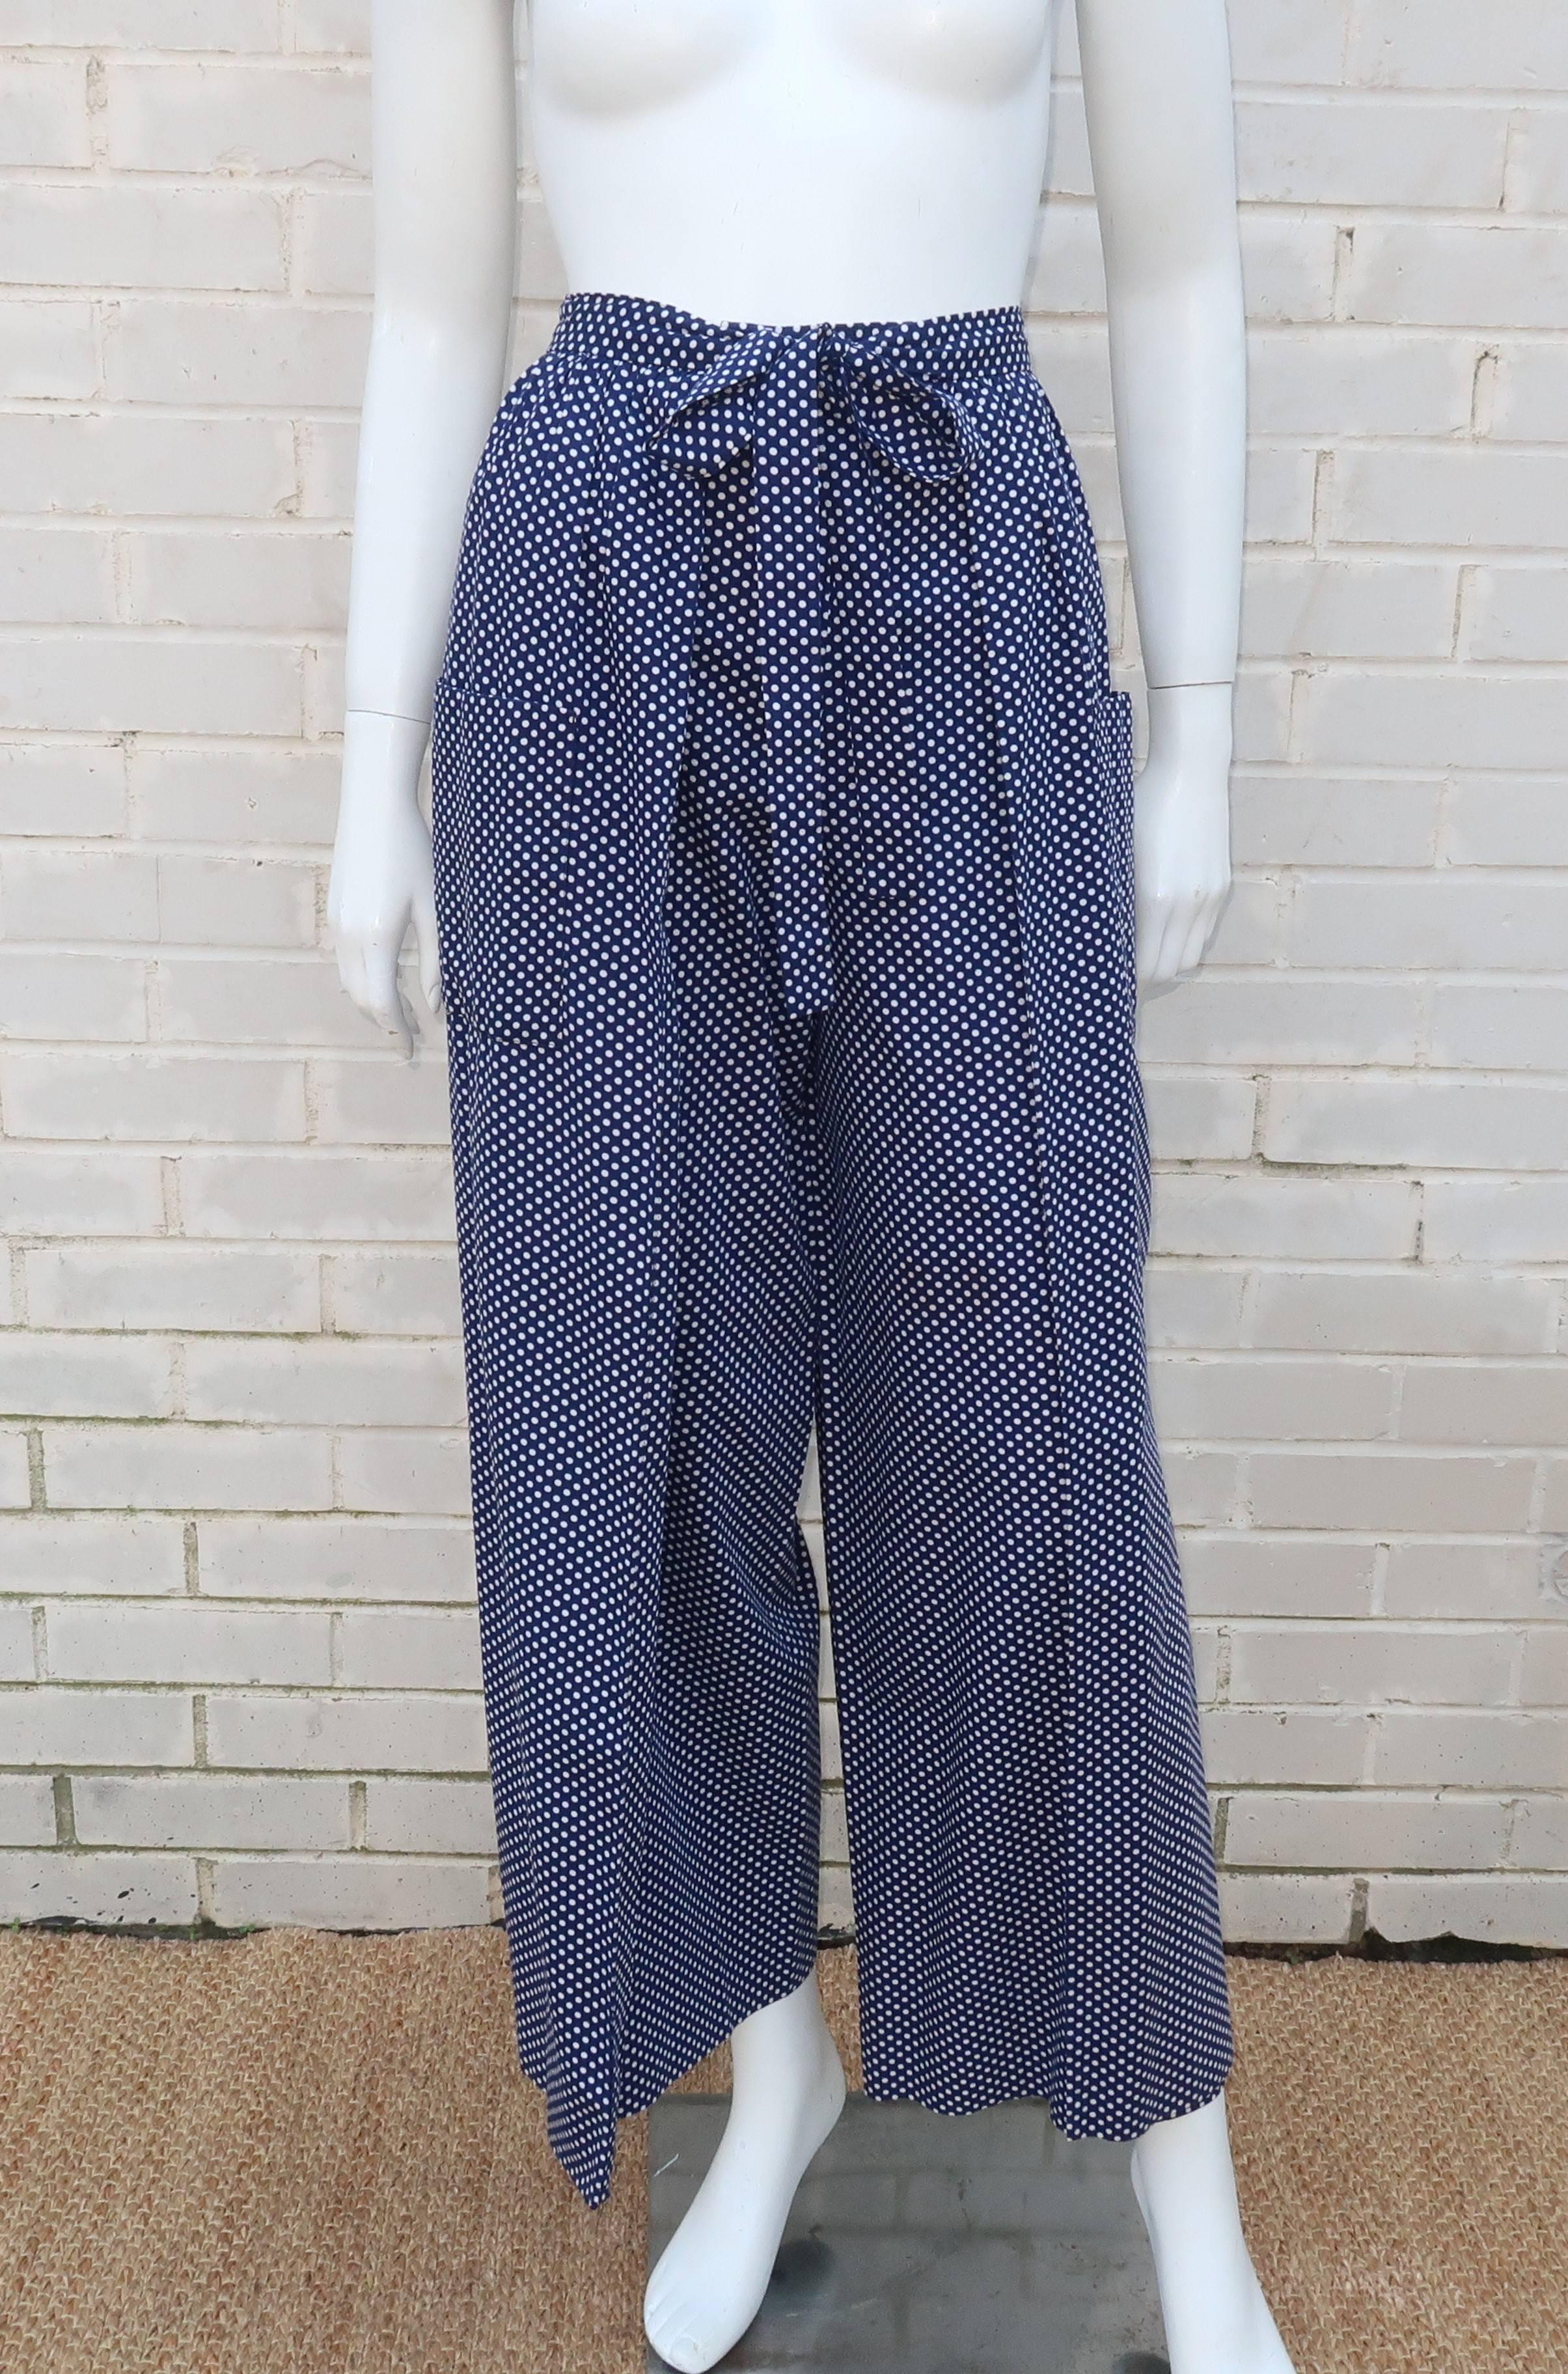 Mary Ann Restivo started her fashion career in the 1960's catering to stylish professional women.  These adorable blue and white polka dot cotton palazzo pants are a bit of a casual departure from her typical designs though they are in keeping with